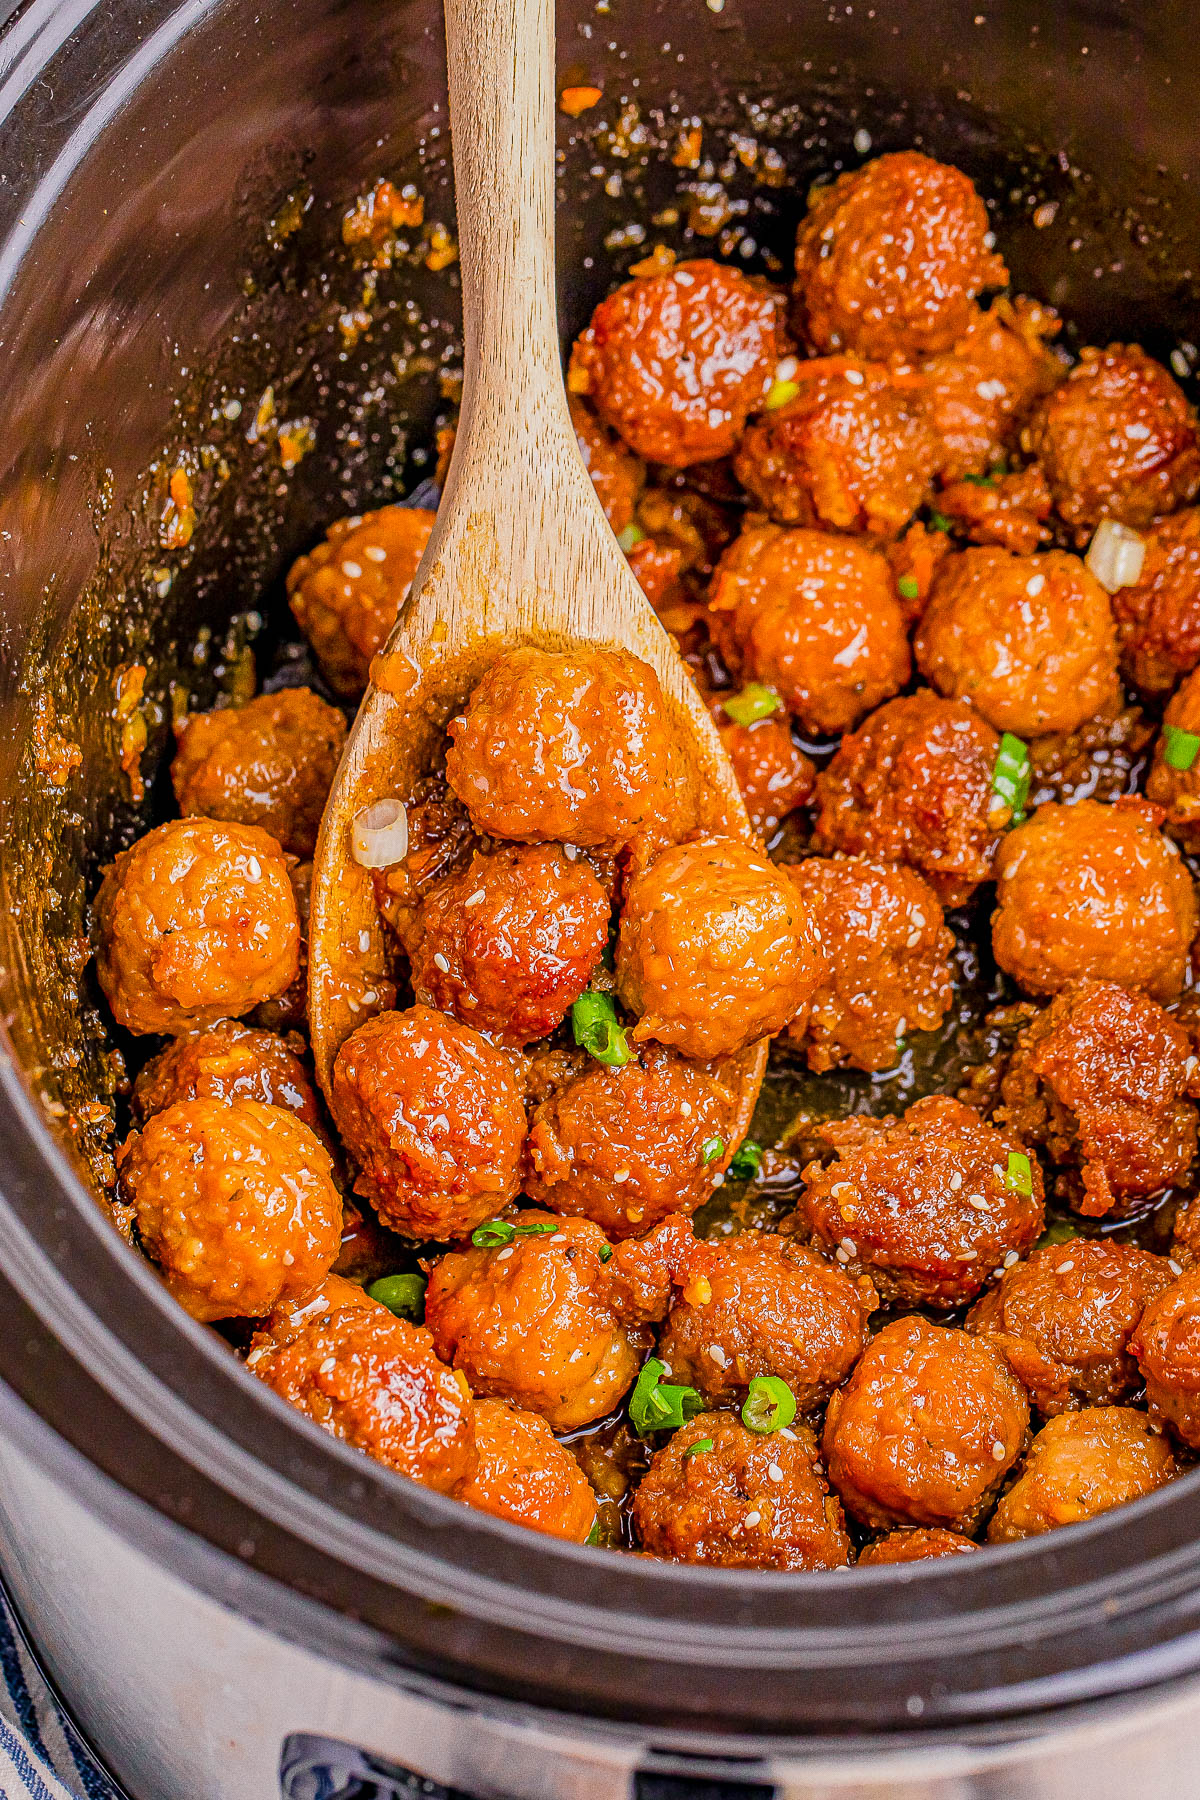 Wooden spoon stirring glazed meatballs in a slow cooker, garnished with chopped green onions.